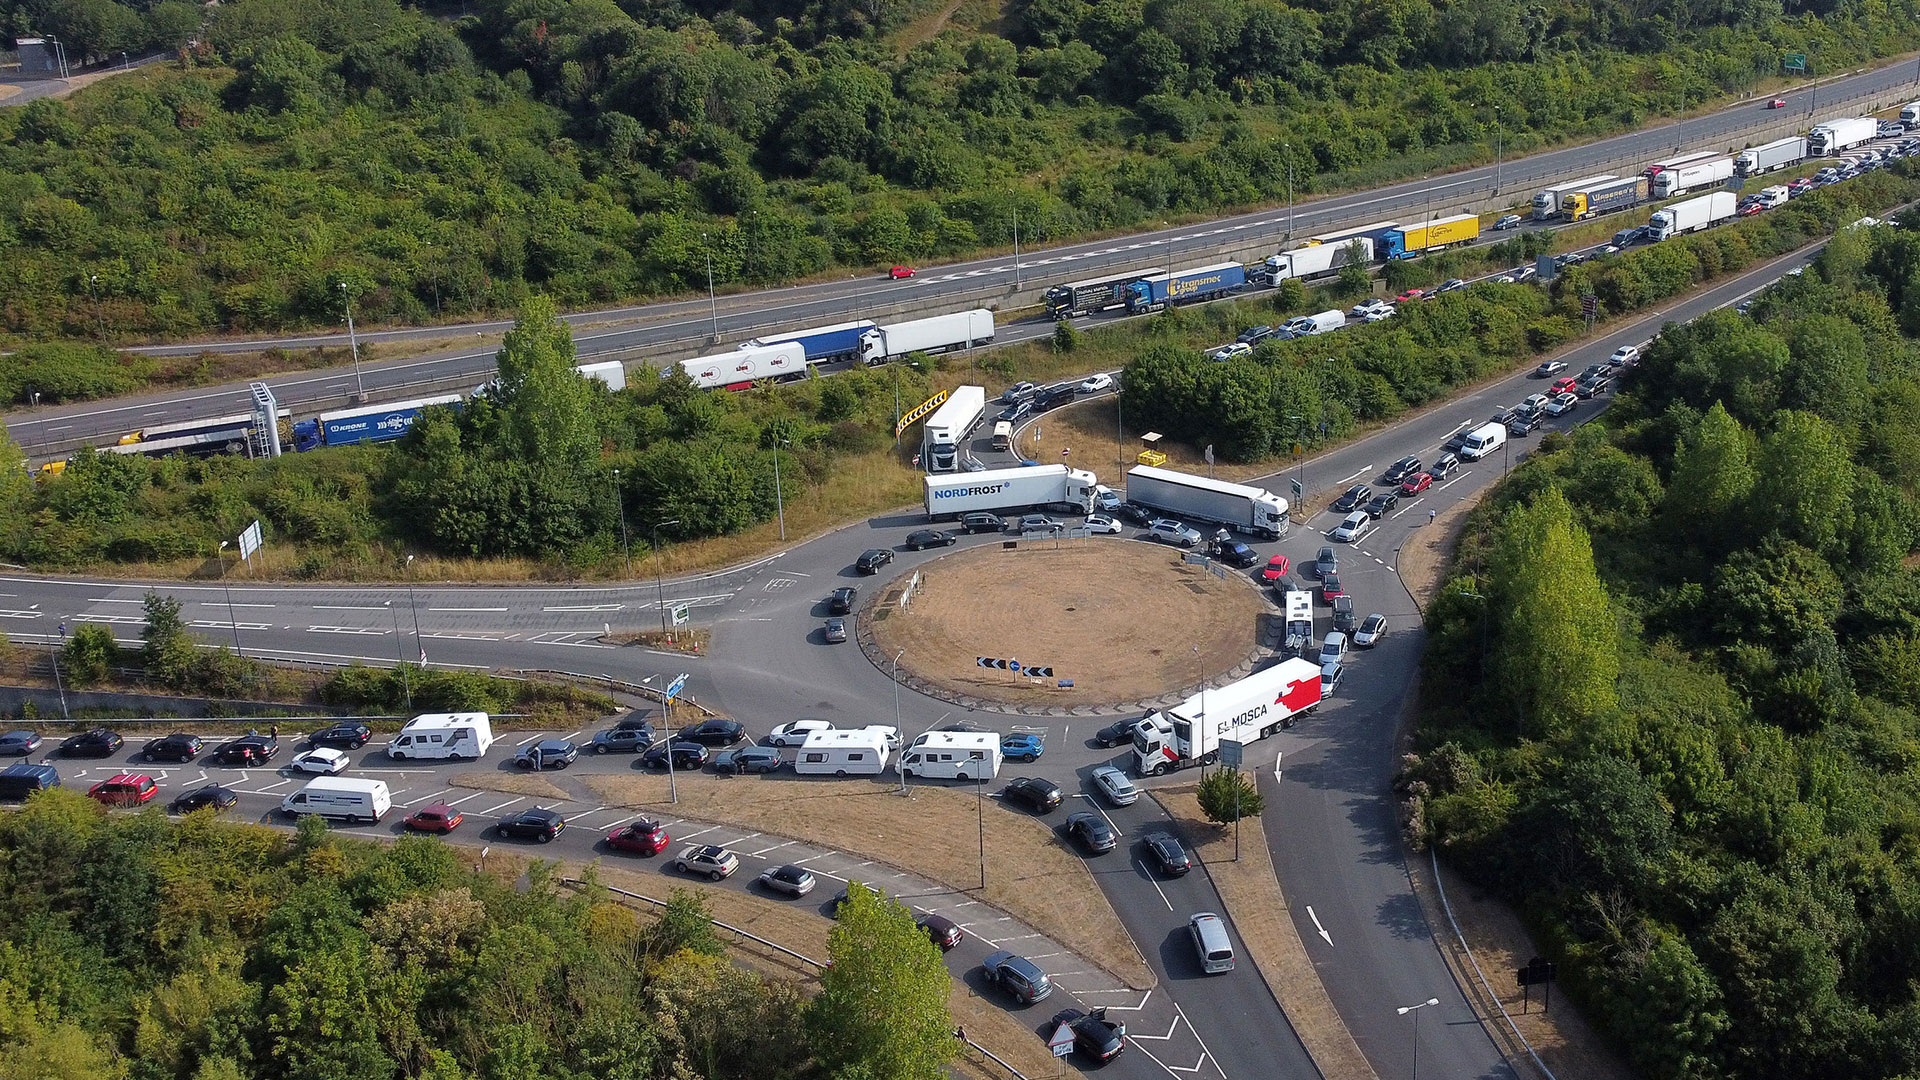 Channel Tunnel detonated, Brits warn of the dangers to their safety. ‘hotspot of holiday hell’